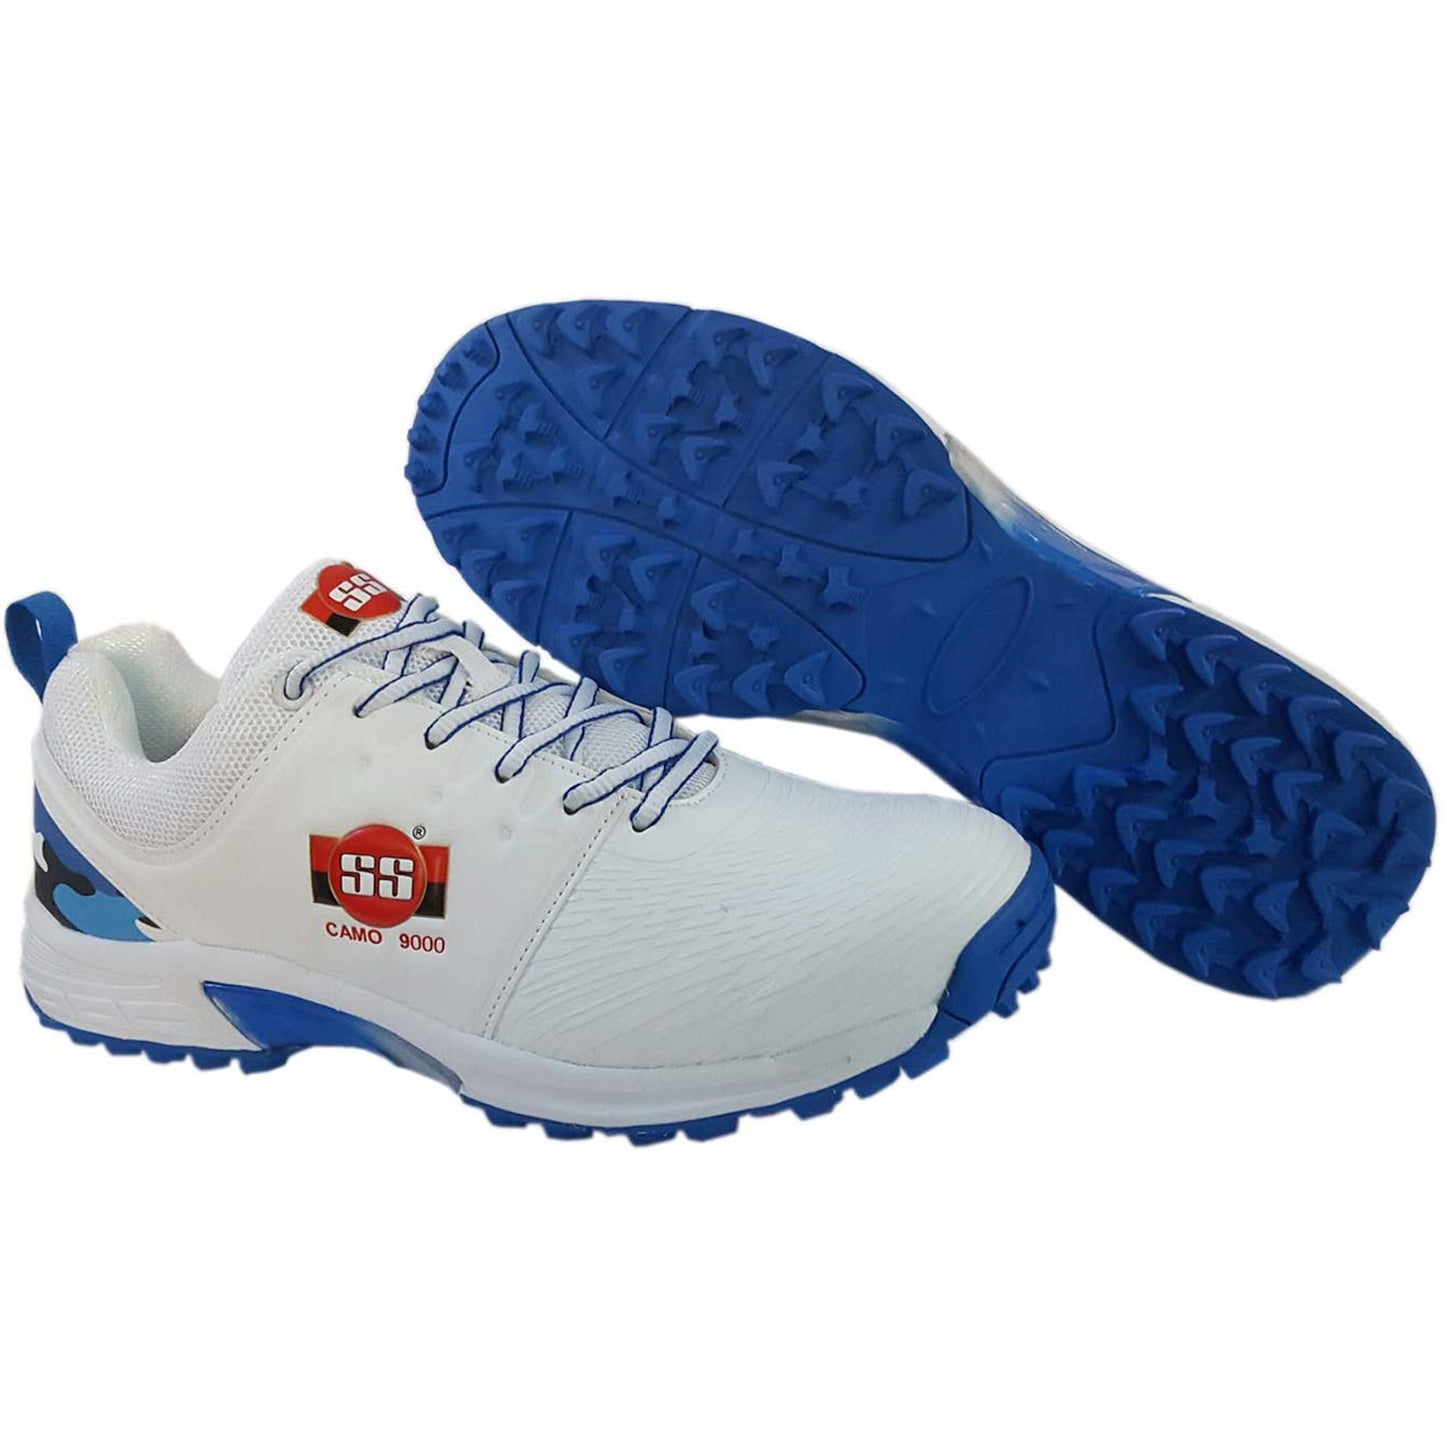 SS Rubber Spikes Professional Cricket Shoes for Men - Camo - White Blue - Best Price online Prokicksports.com